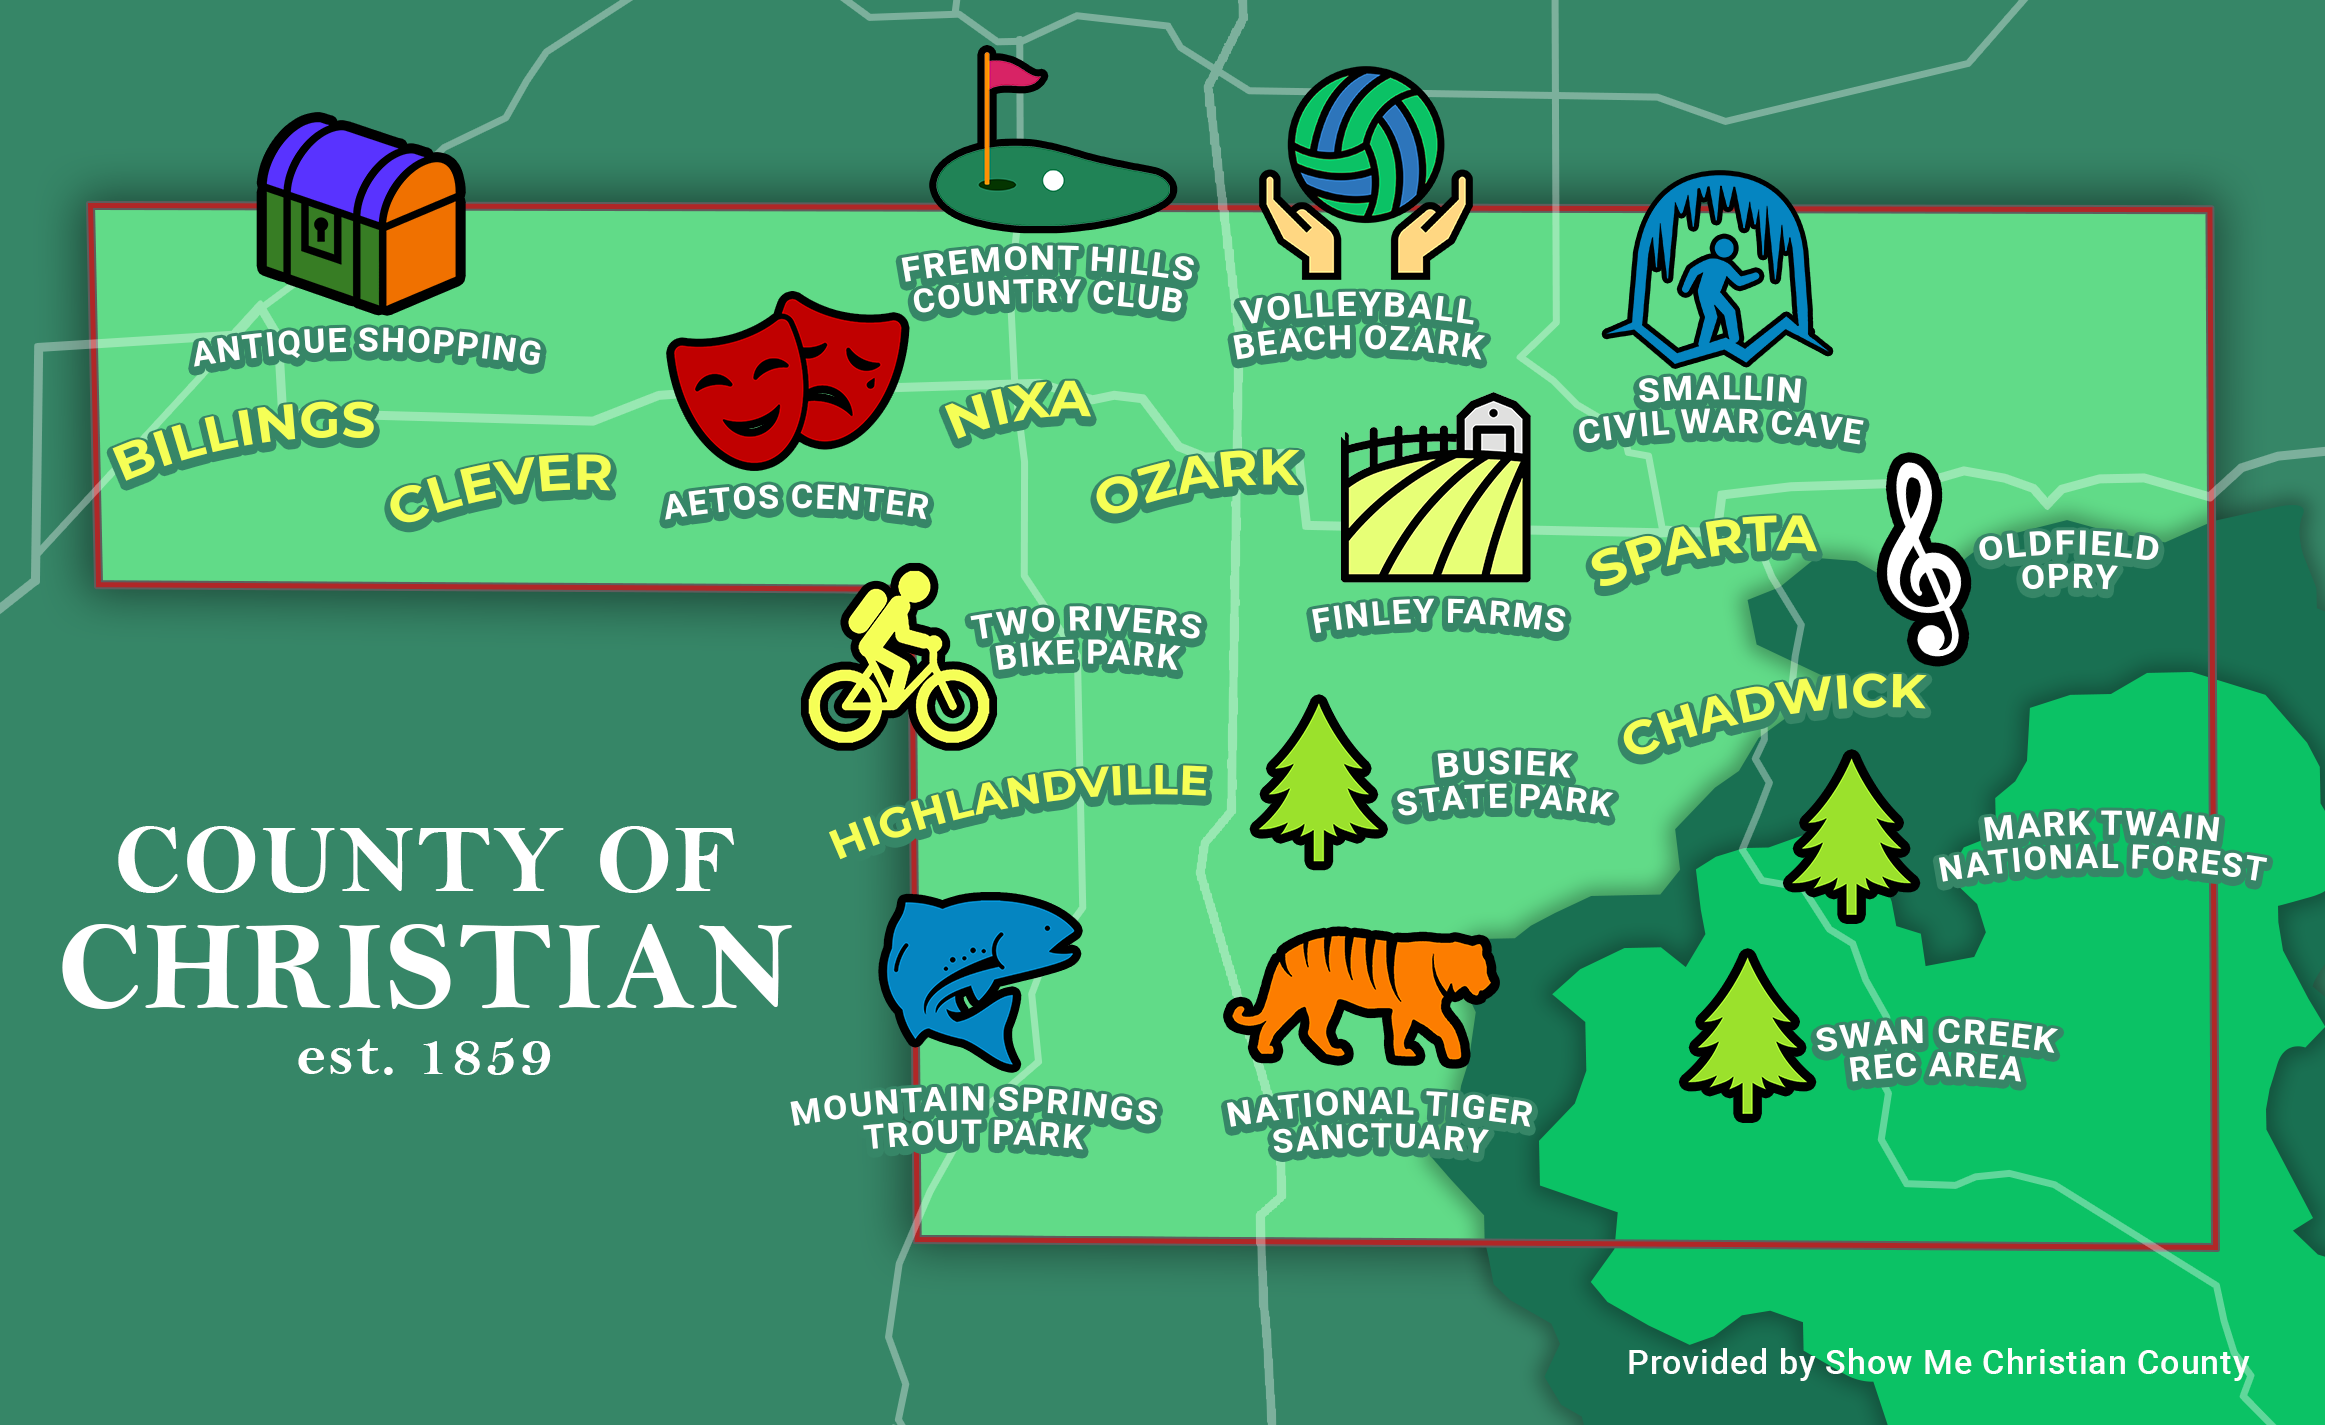 Map created by Show Me Christian County for CC Headliner Community Guide.